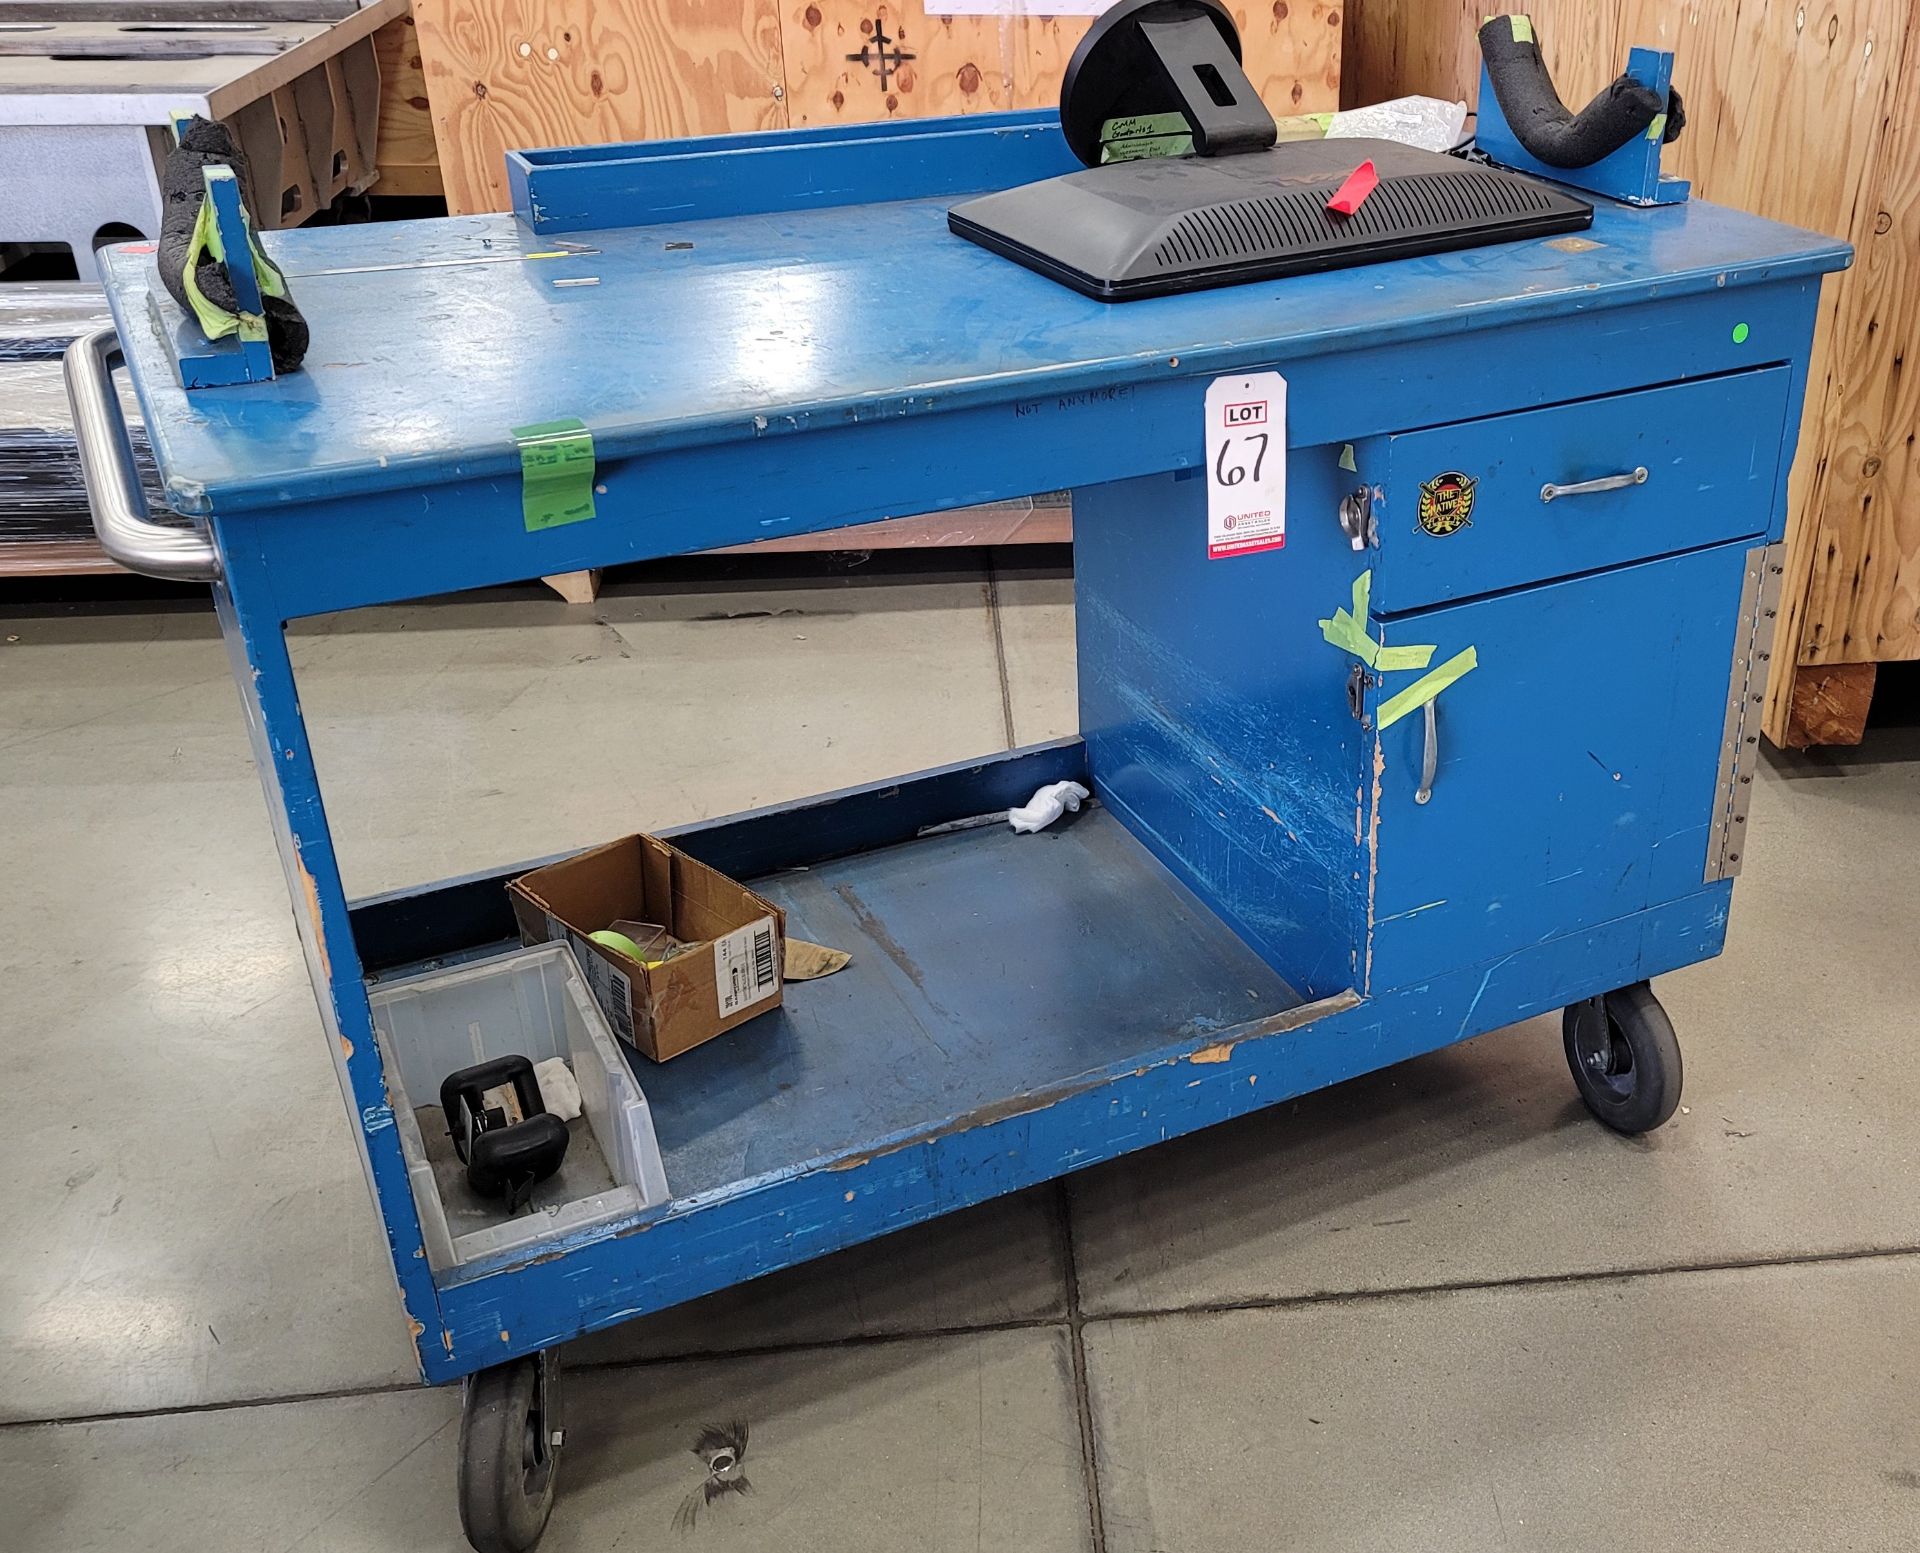 PORTABLE WORK STATION, 5' X 30" TOP (LOCATION: BUILDING 50)